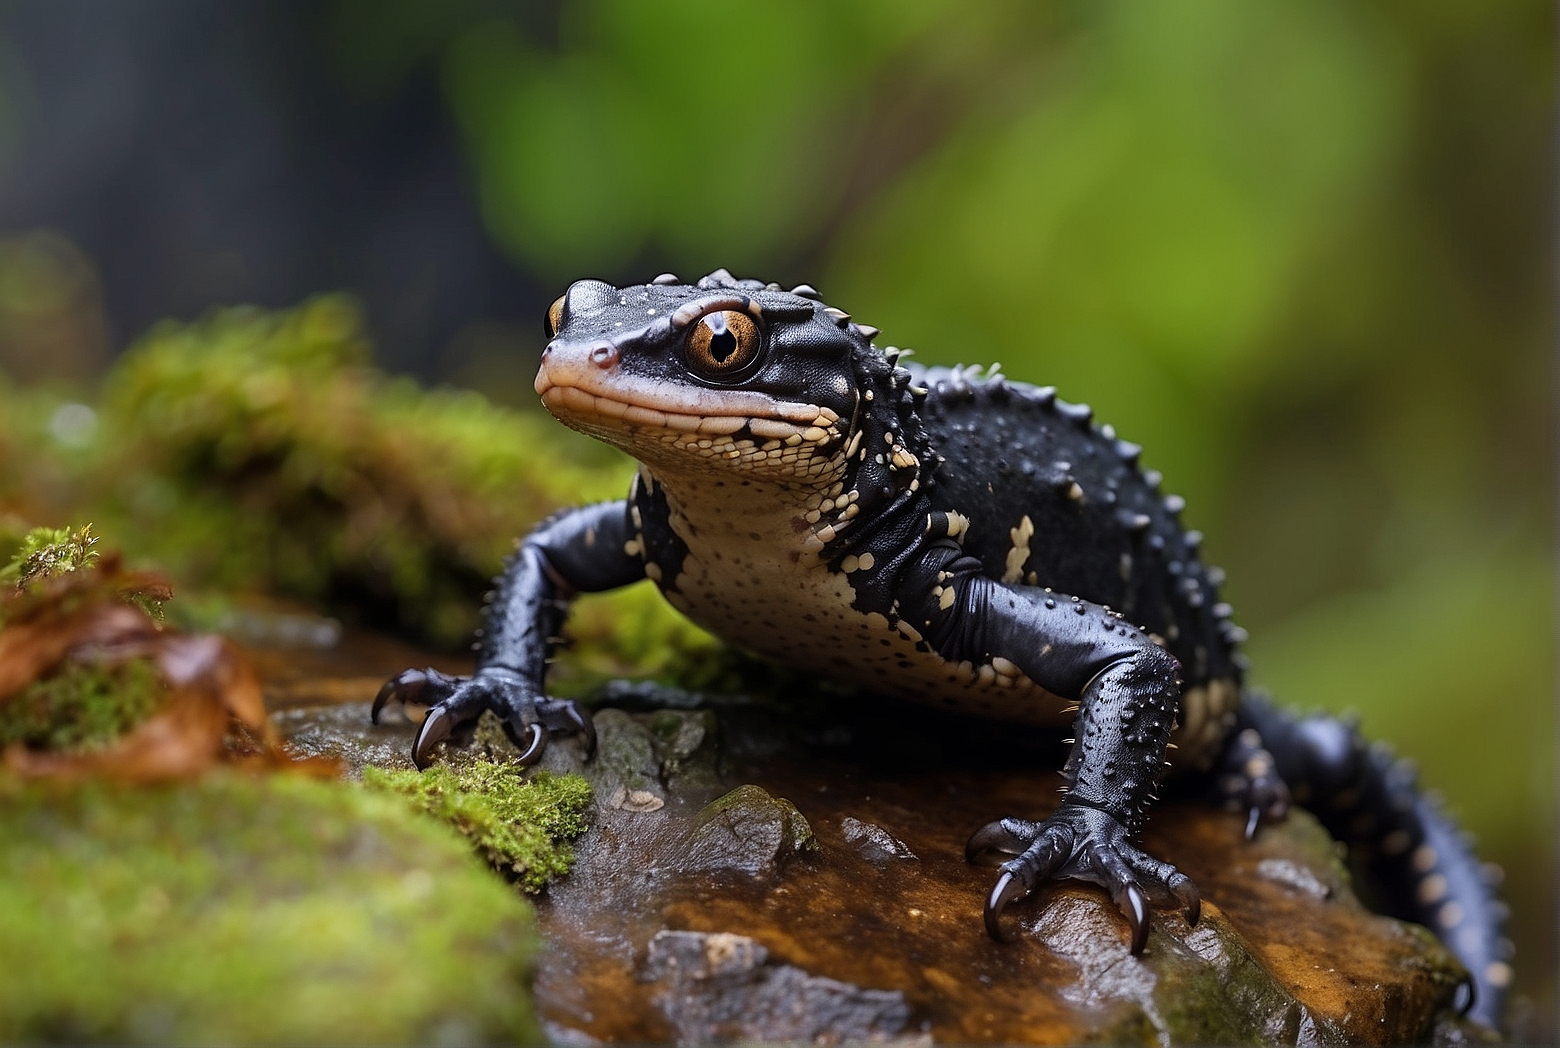 Salamanders and Their Impressive Wall-Climbing Abilities